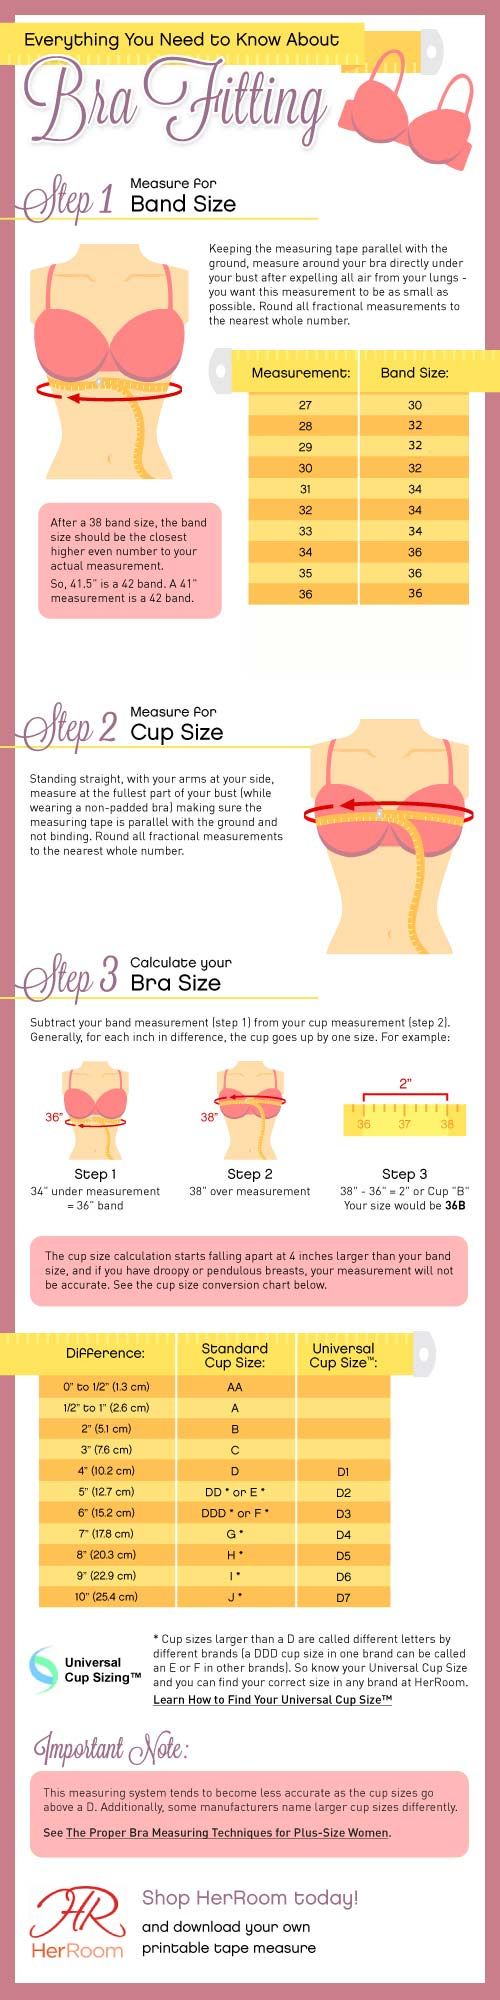 How to Choose the Right Bra - Life of Que